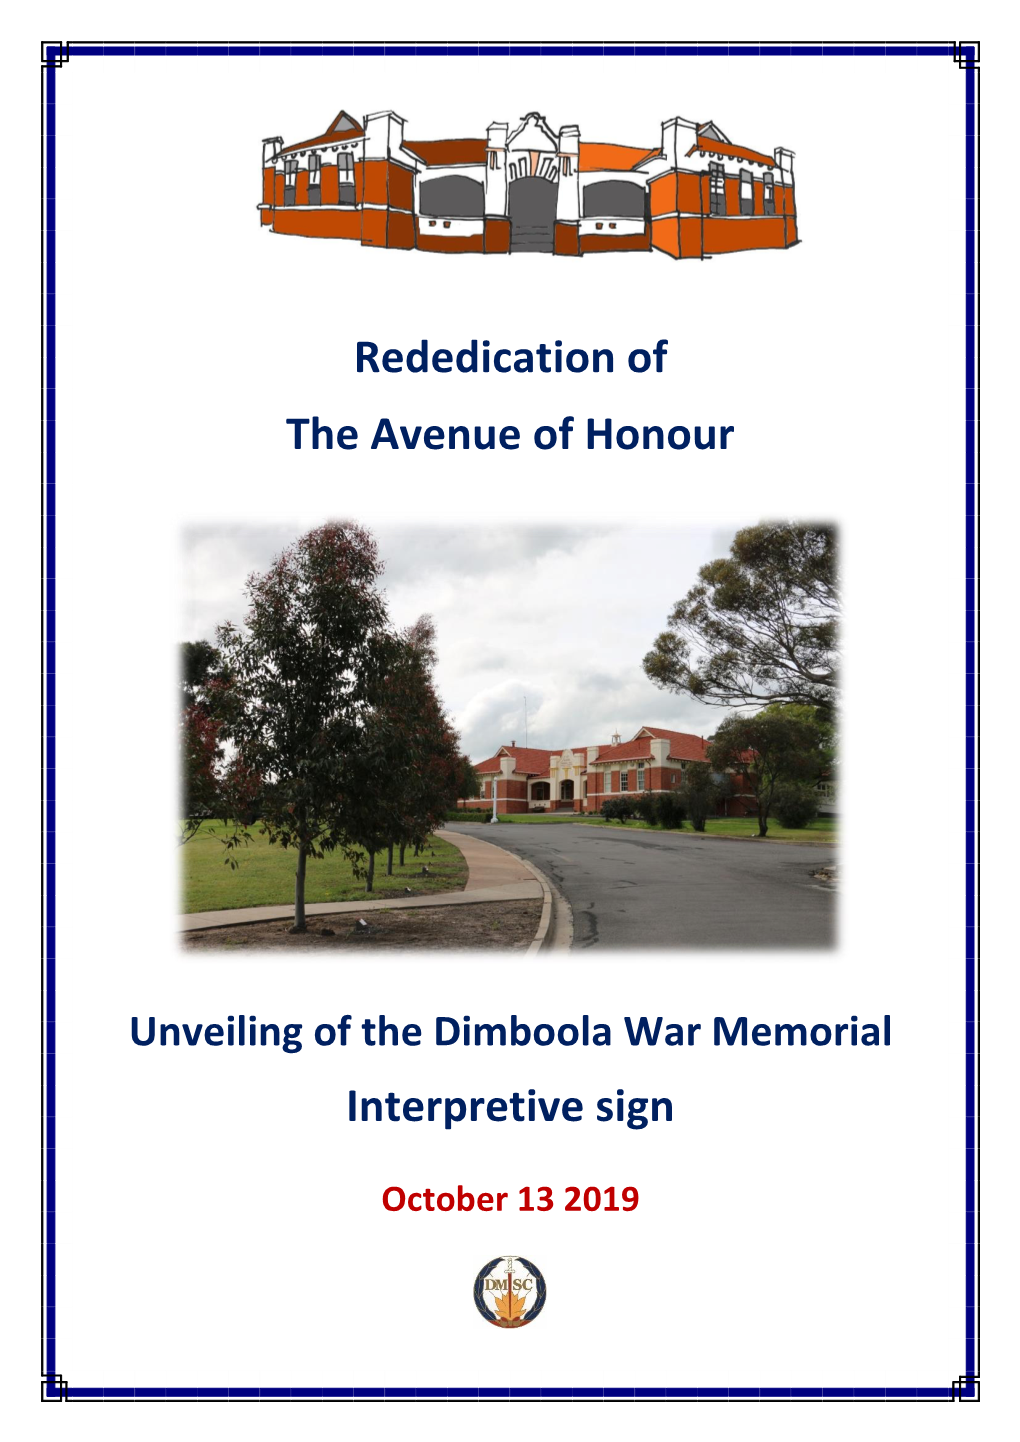 Rededication of the Avenue of Honour Interpretive Sign